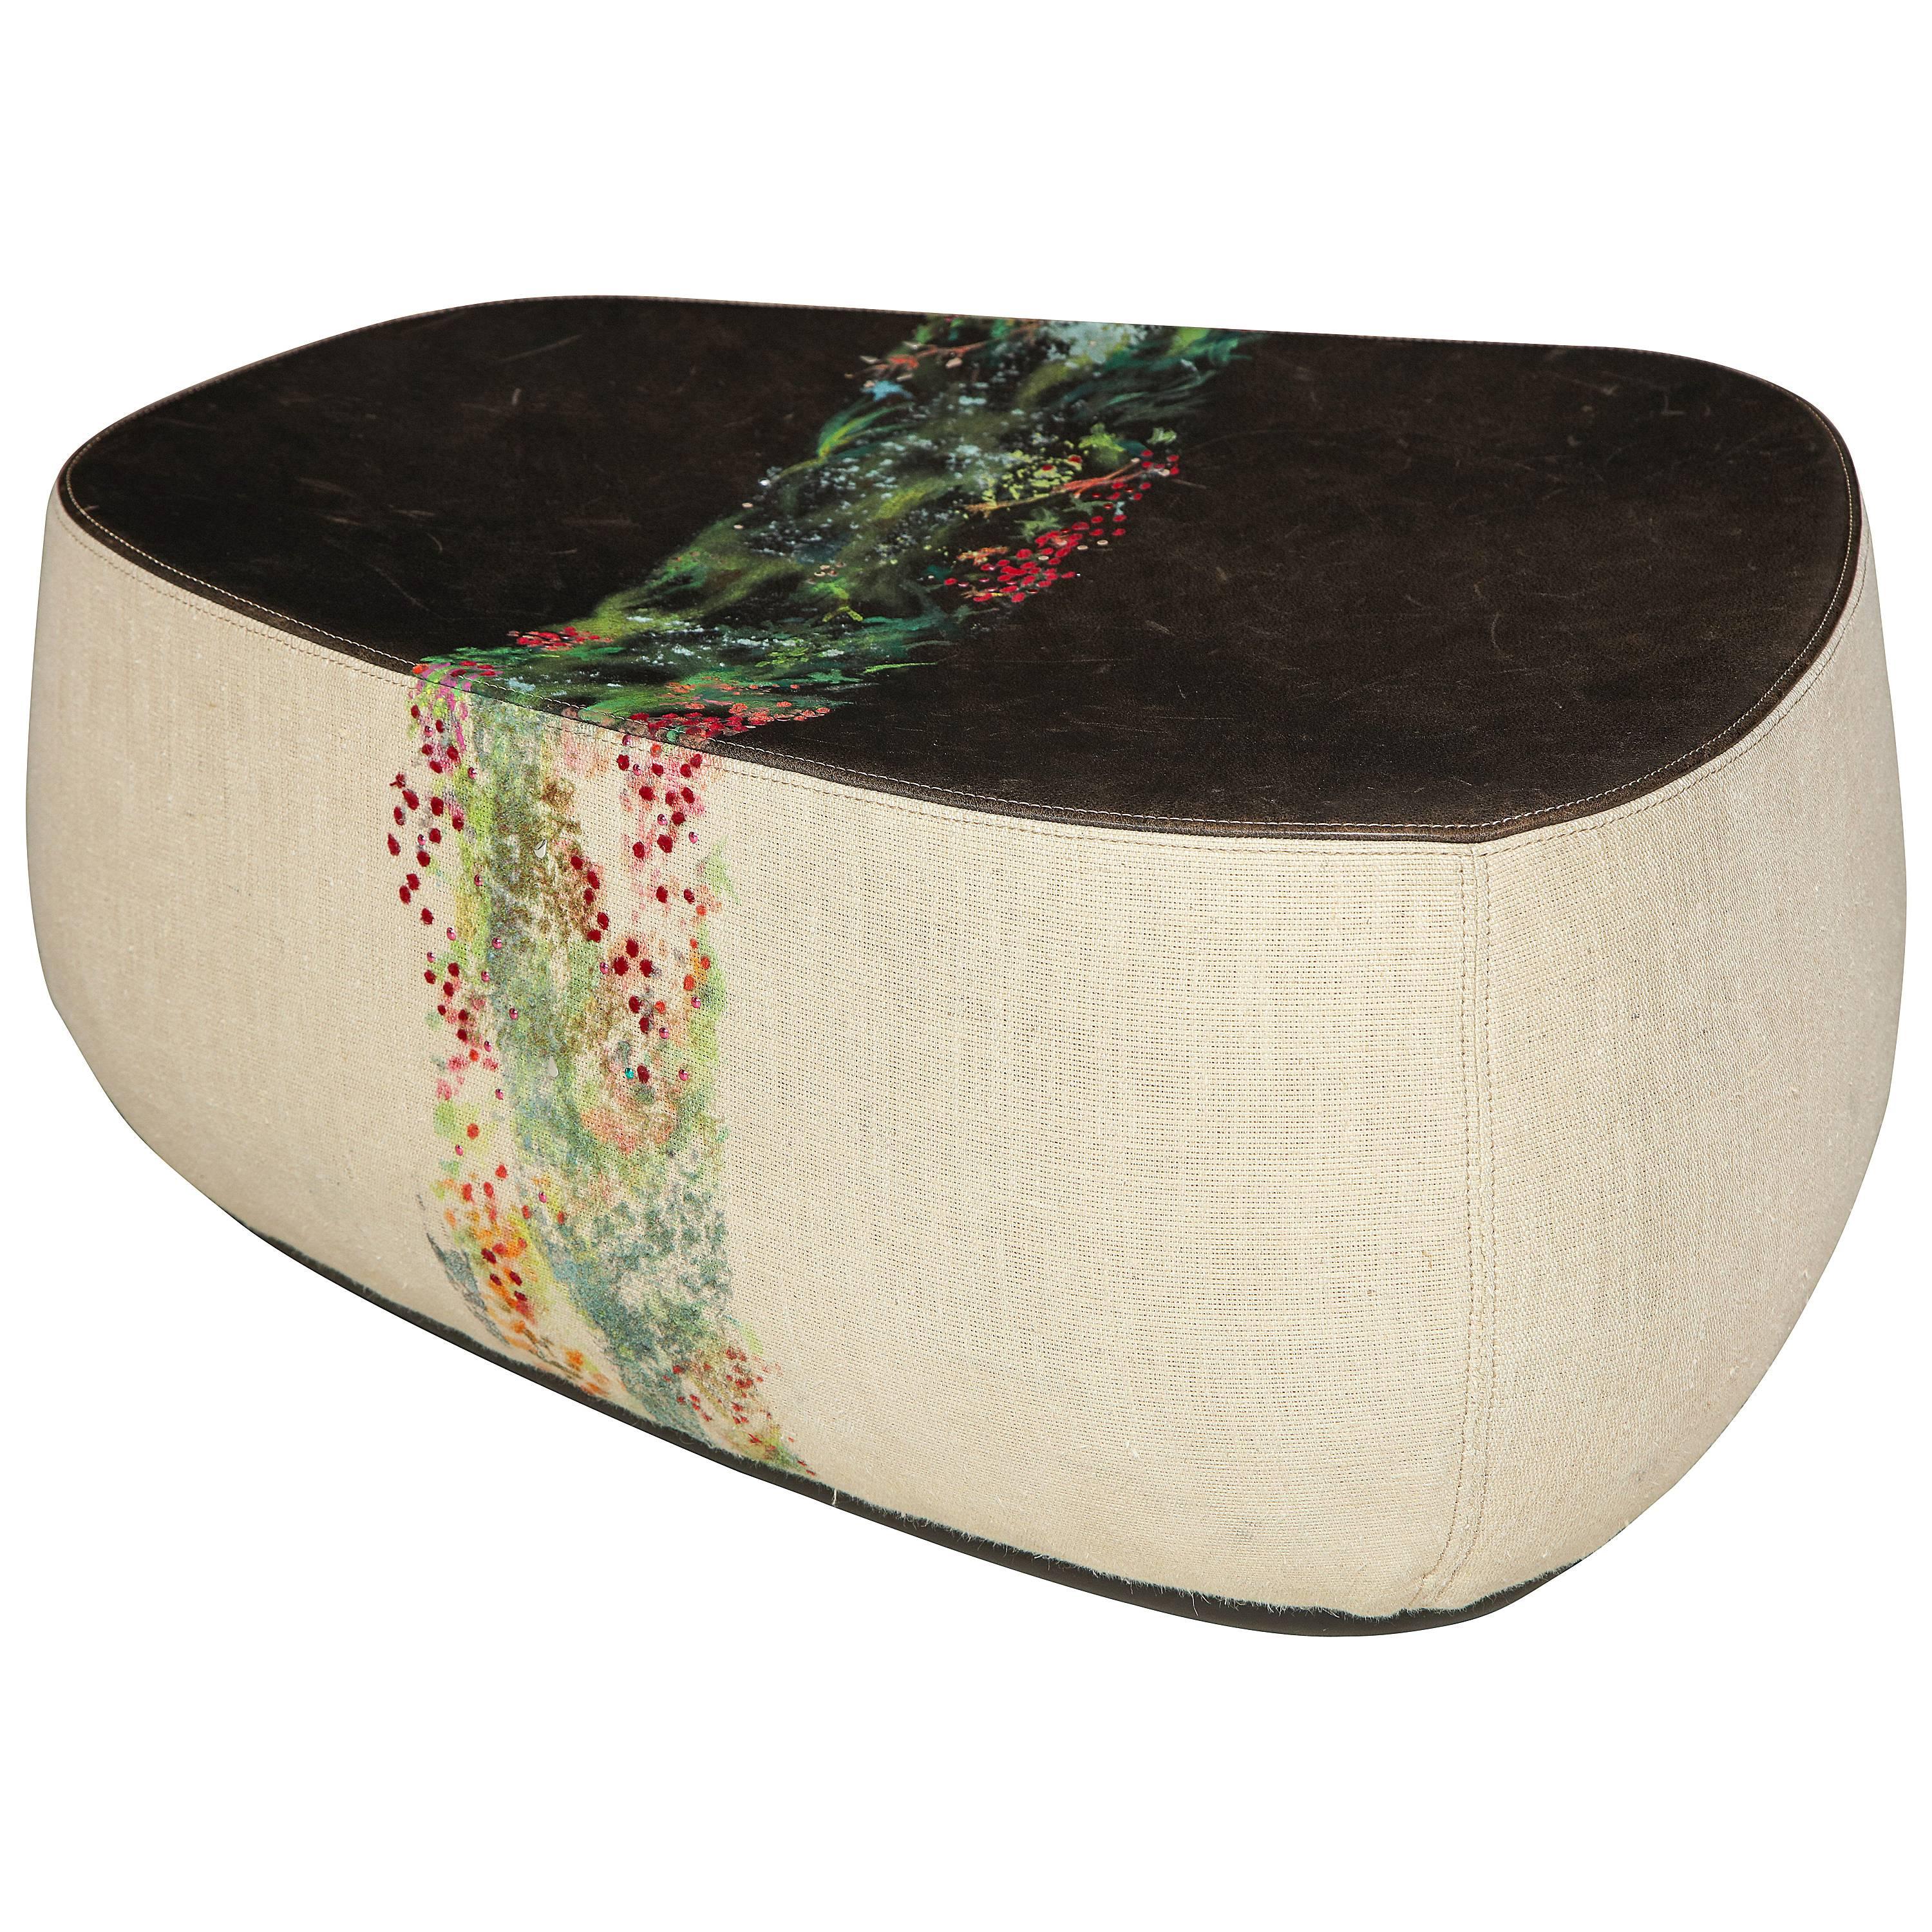 "Fjord" Stool by Nuala Goodman and Patricia Urquiola for Moroso